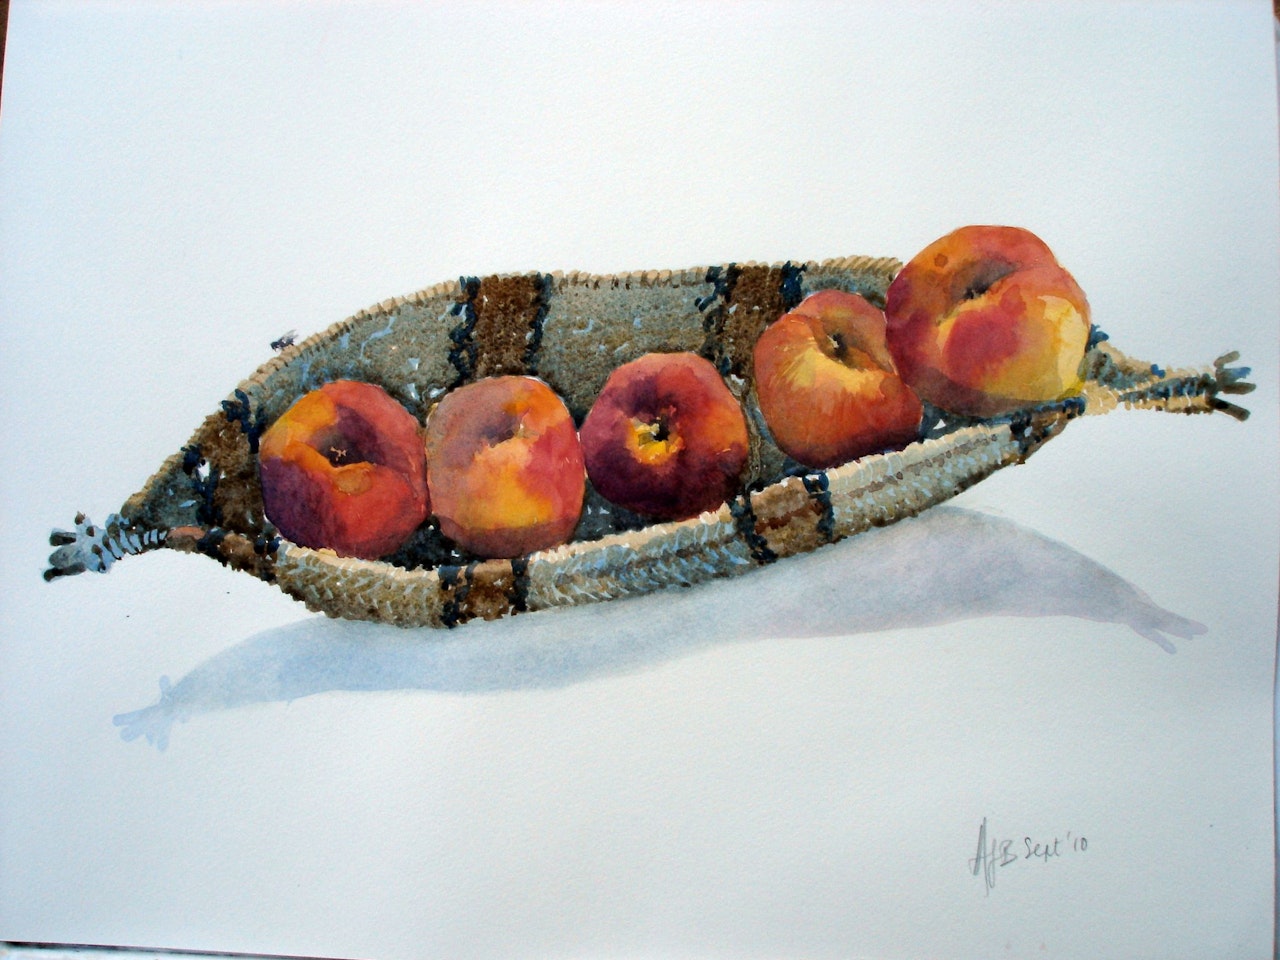 Fly on the peaches(sold Rita Moseley)